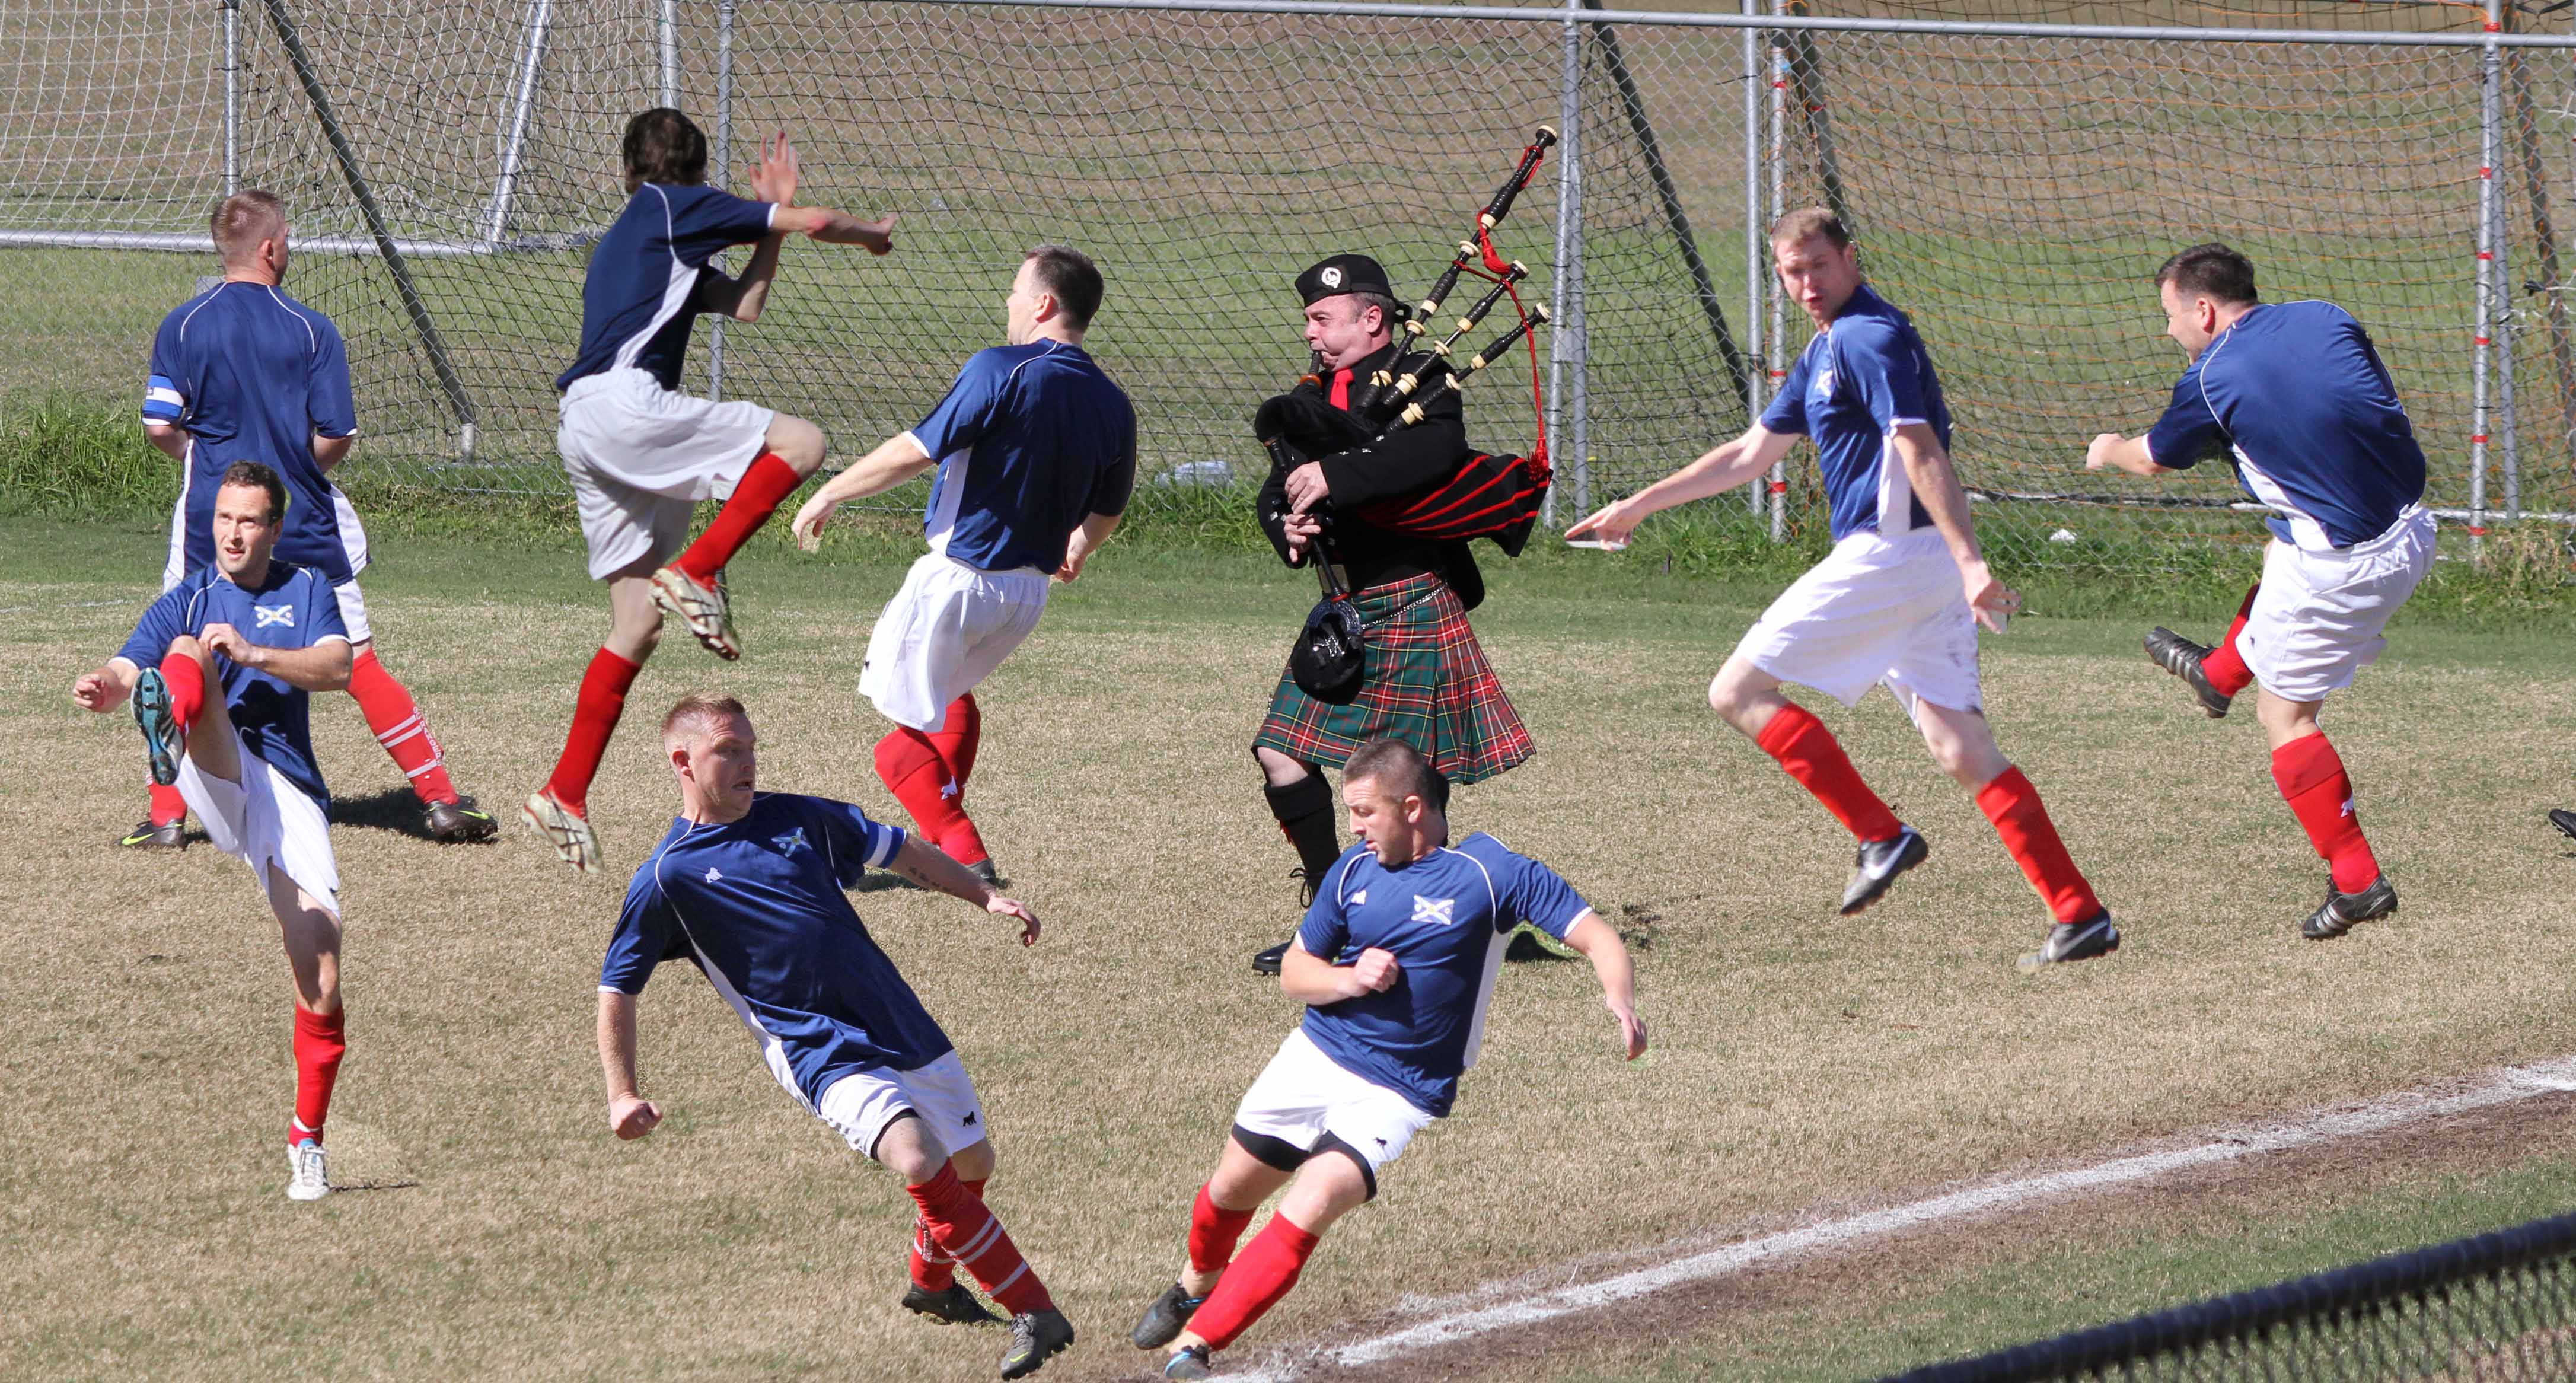 Christmas in July meet/ Scotland Vs England football match. - Page 6 - British Expats